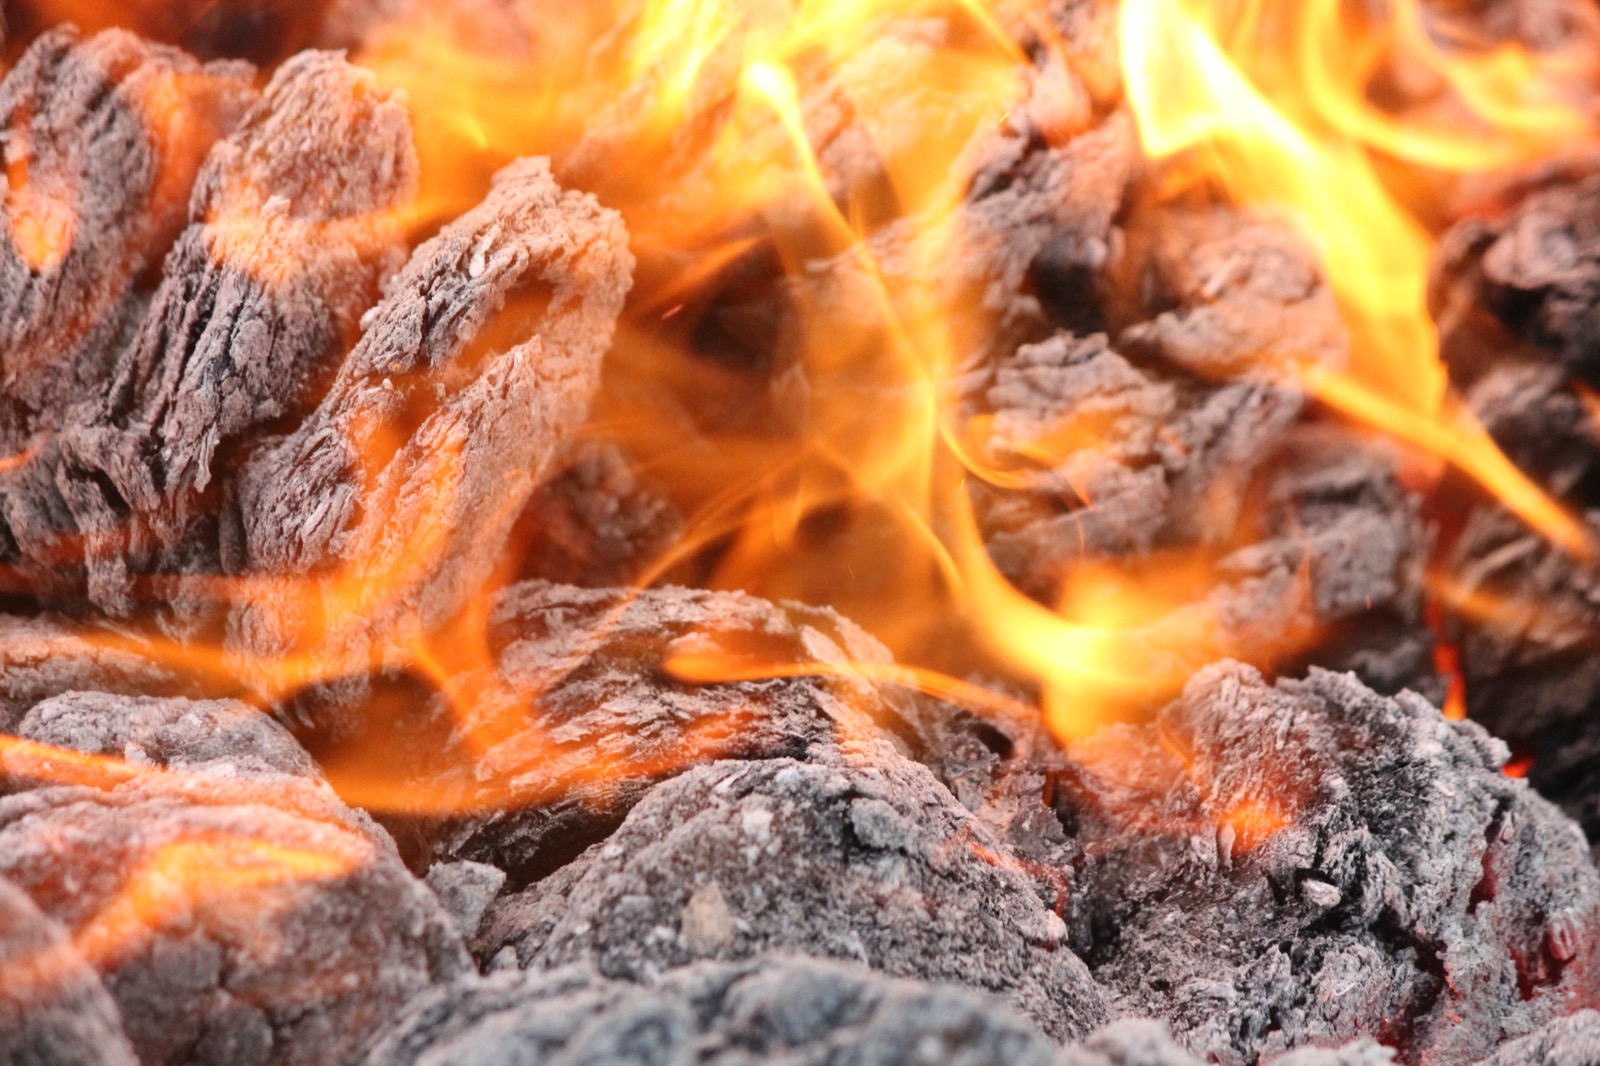 Waste Not Want Hotmax Fuel Briquettes, How To Dispose Of Ashes From Fire Pit Uk